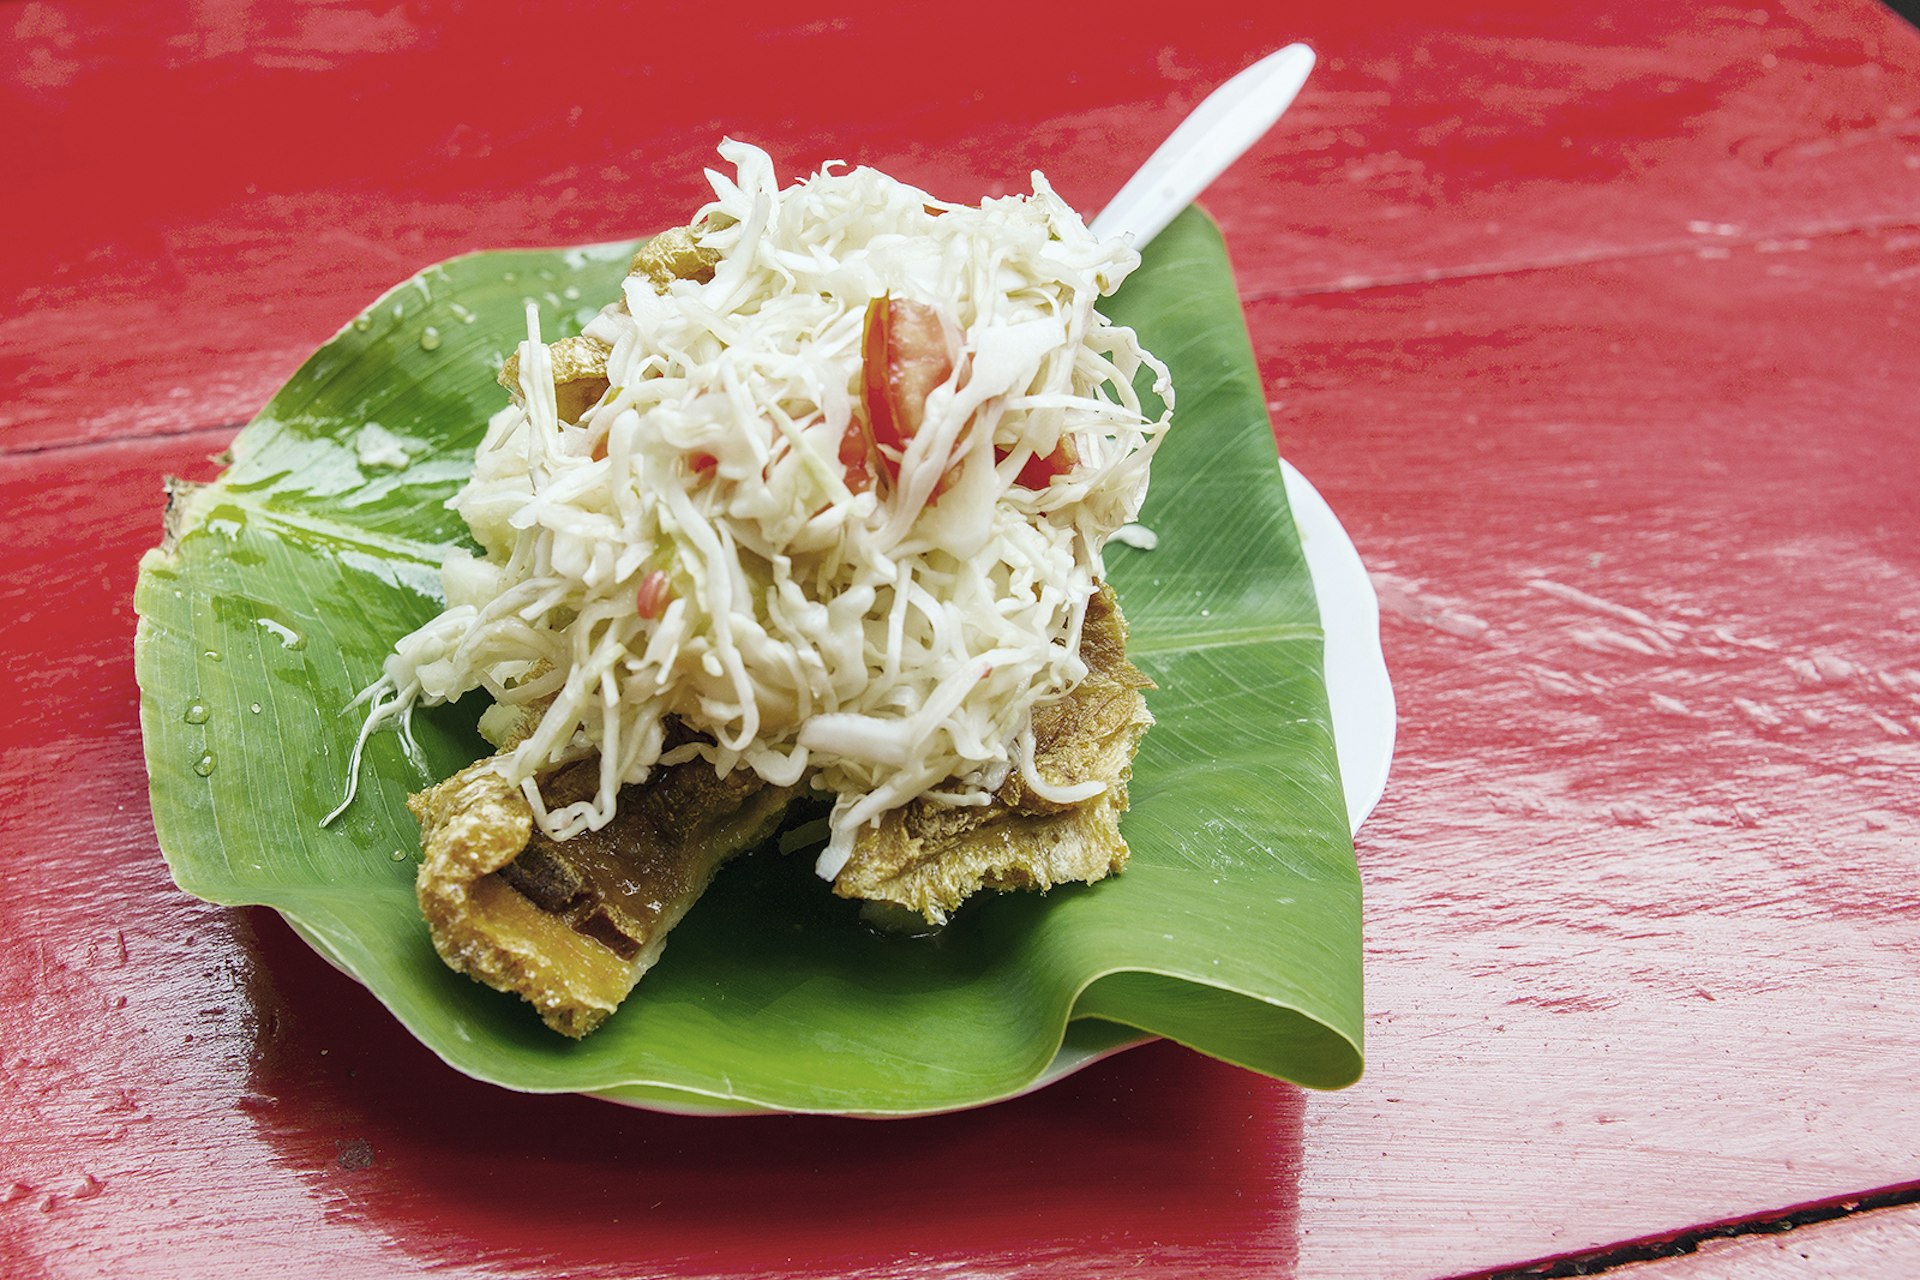 Vigorón is a popular snack that consists of fried pork skin, marinated cabbage and © Fertnig / Getty Images